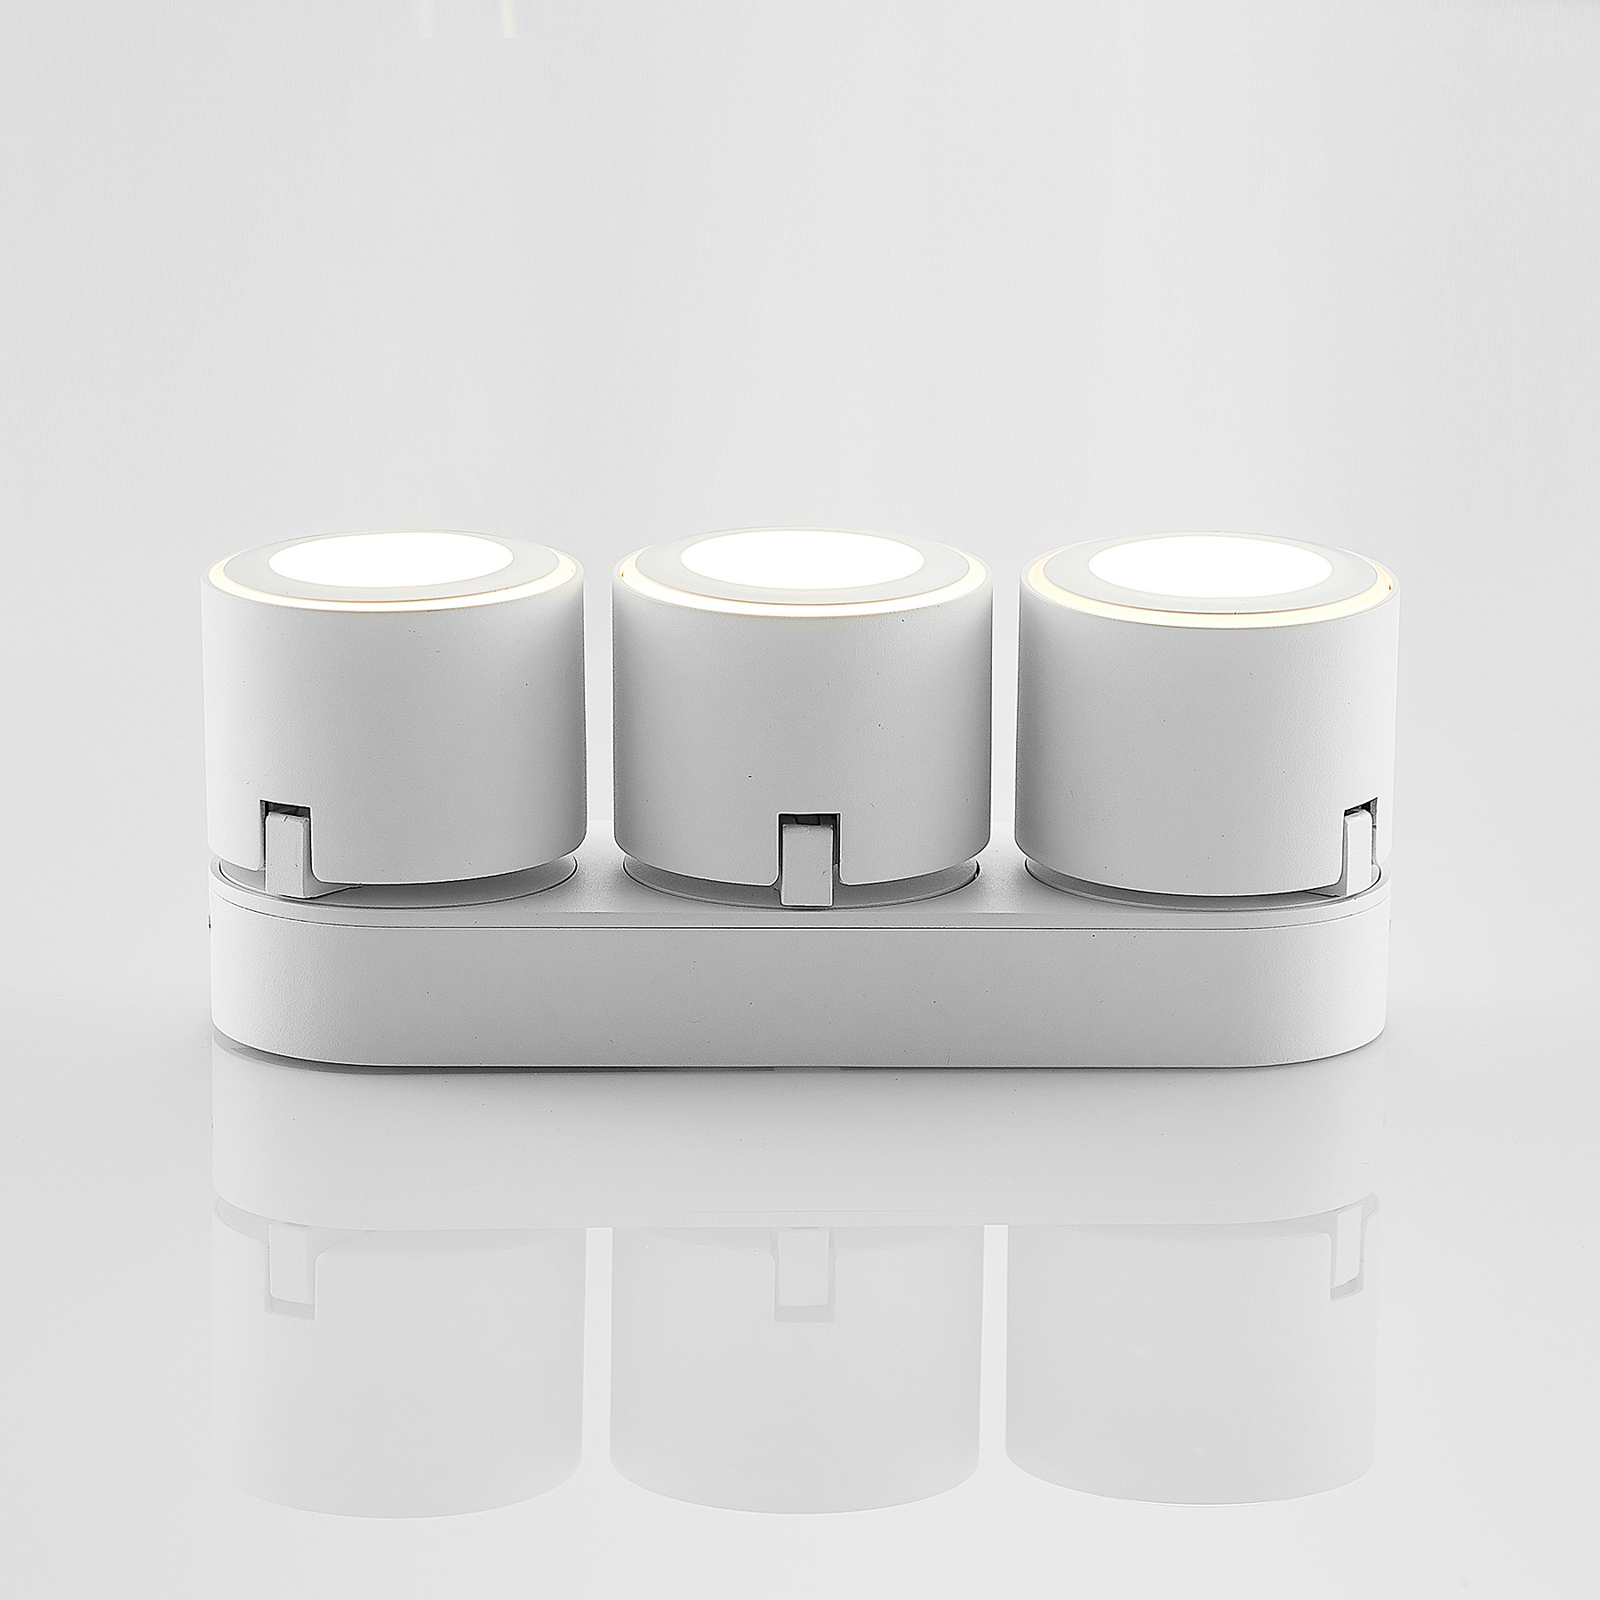 Lindby Lowie foco LED, 3 luces, blanco